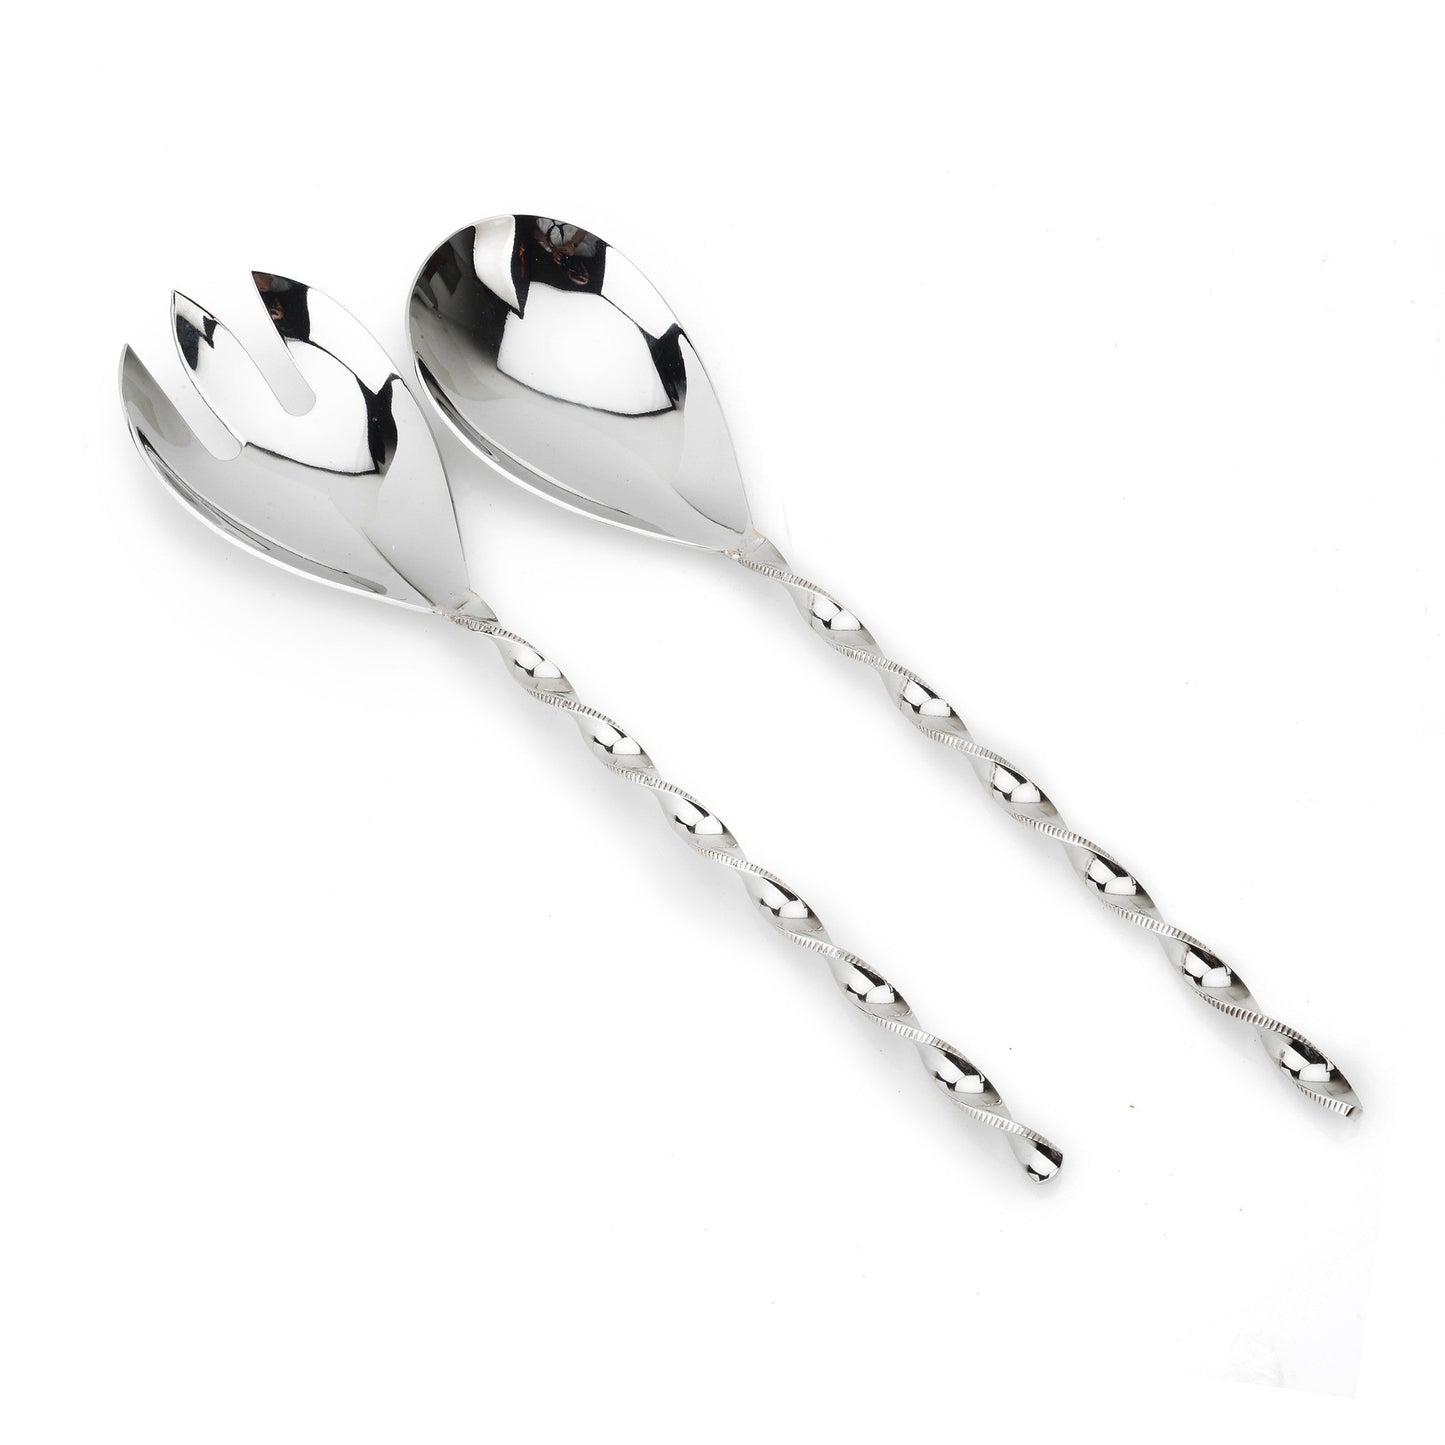 Classic Touch Set Of 2 Salad Servers Twisted Handles, Stainless Steel, 6"